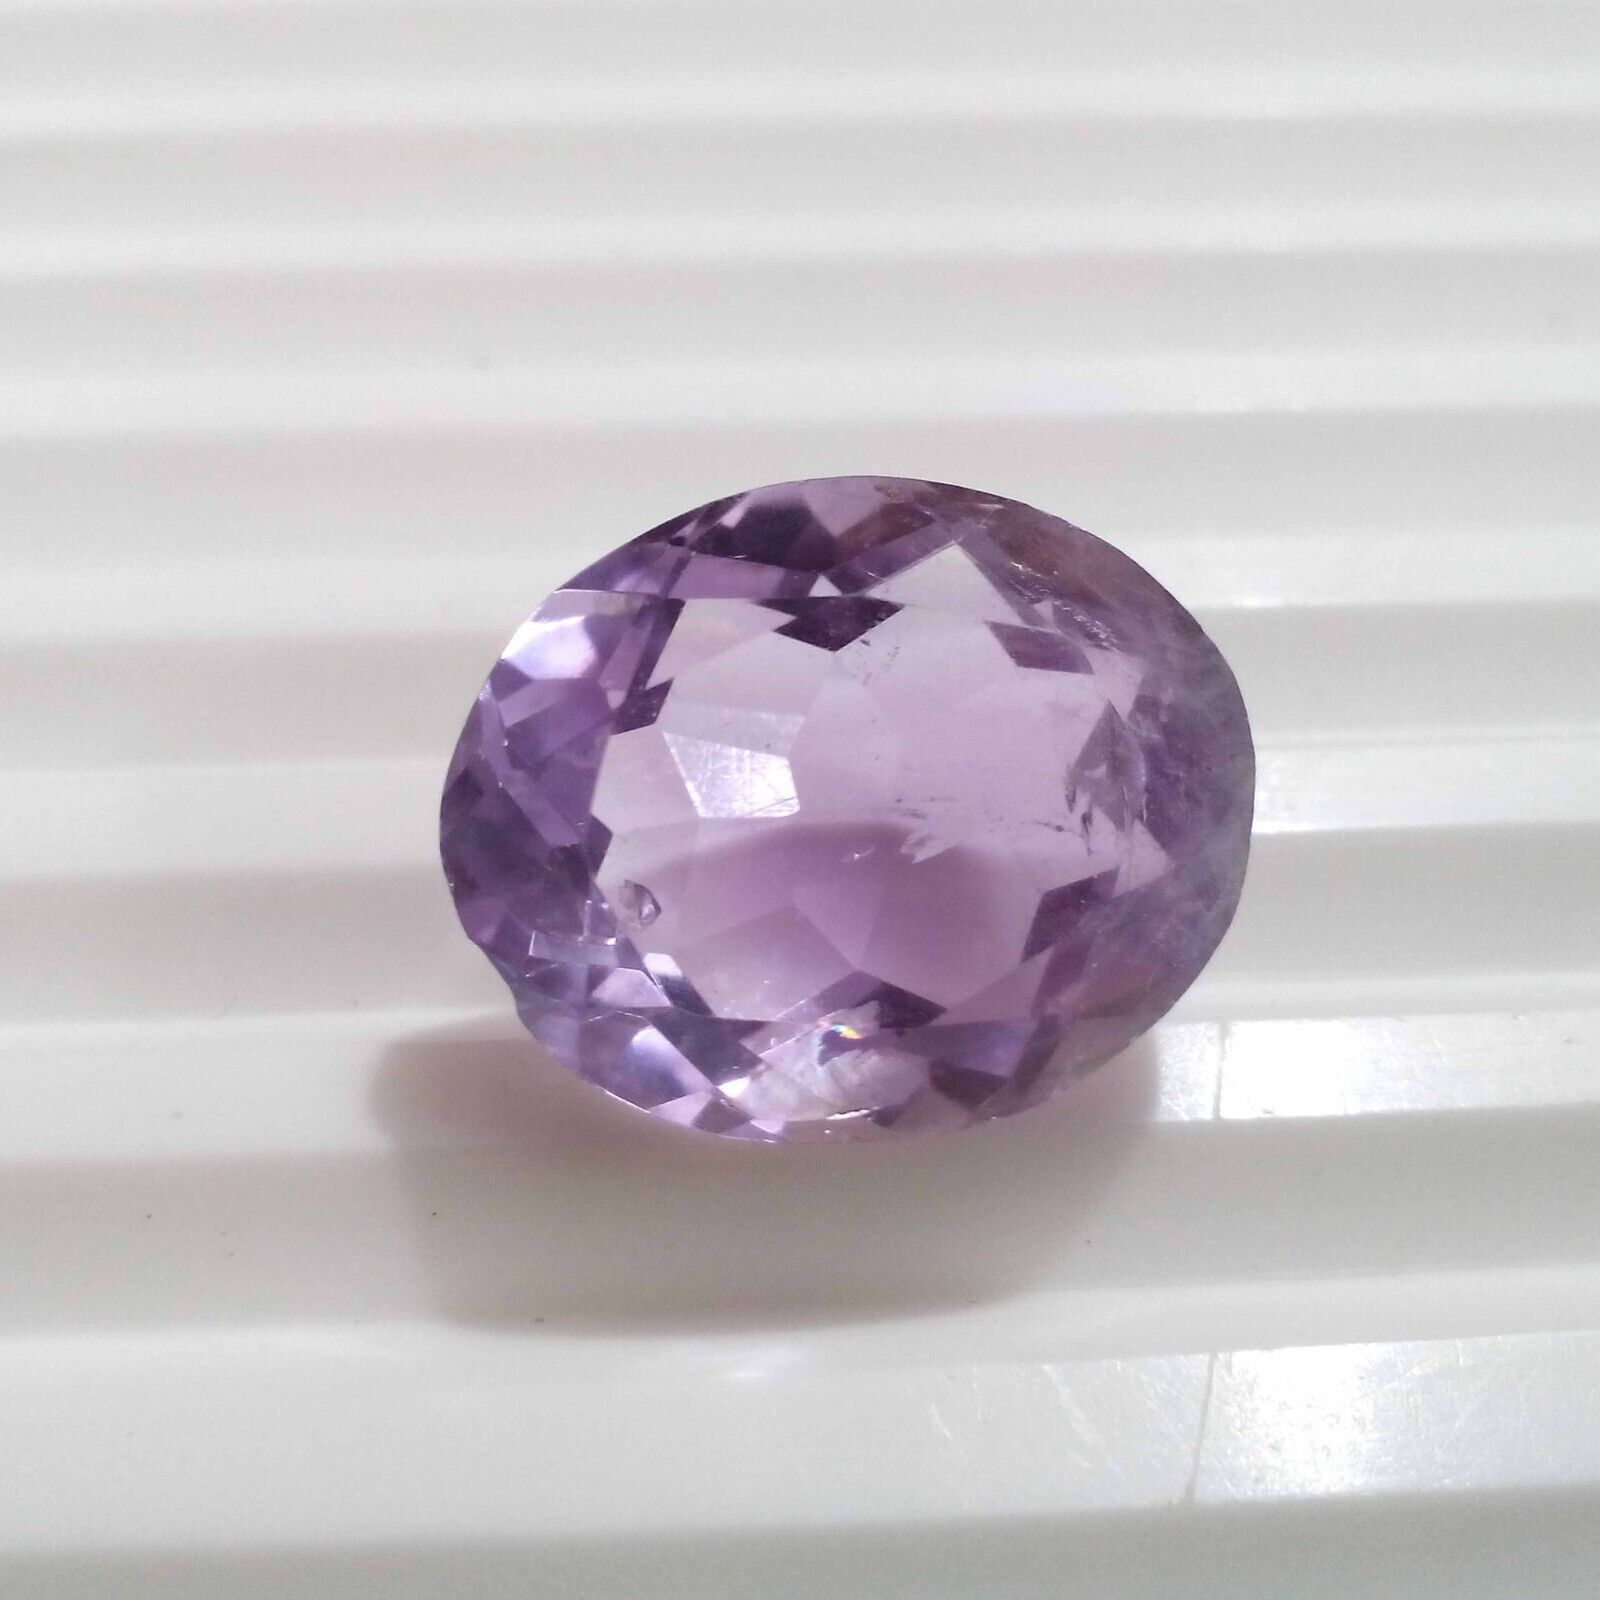 Attractive Pink Amethyst Oval Shape 12.45 Crt Amethyst Faceted Loose Gemstone